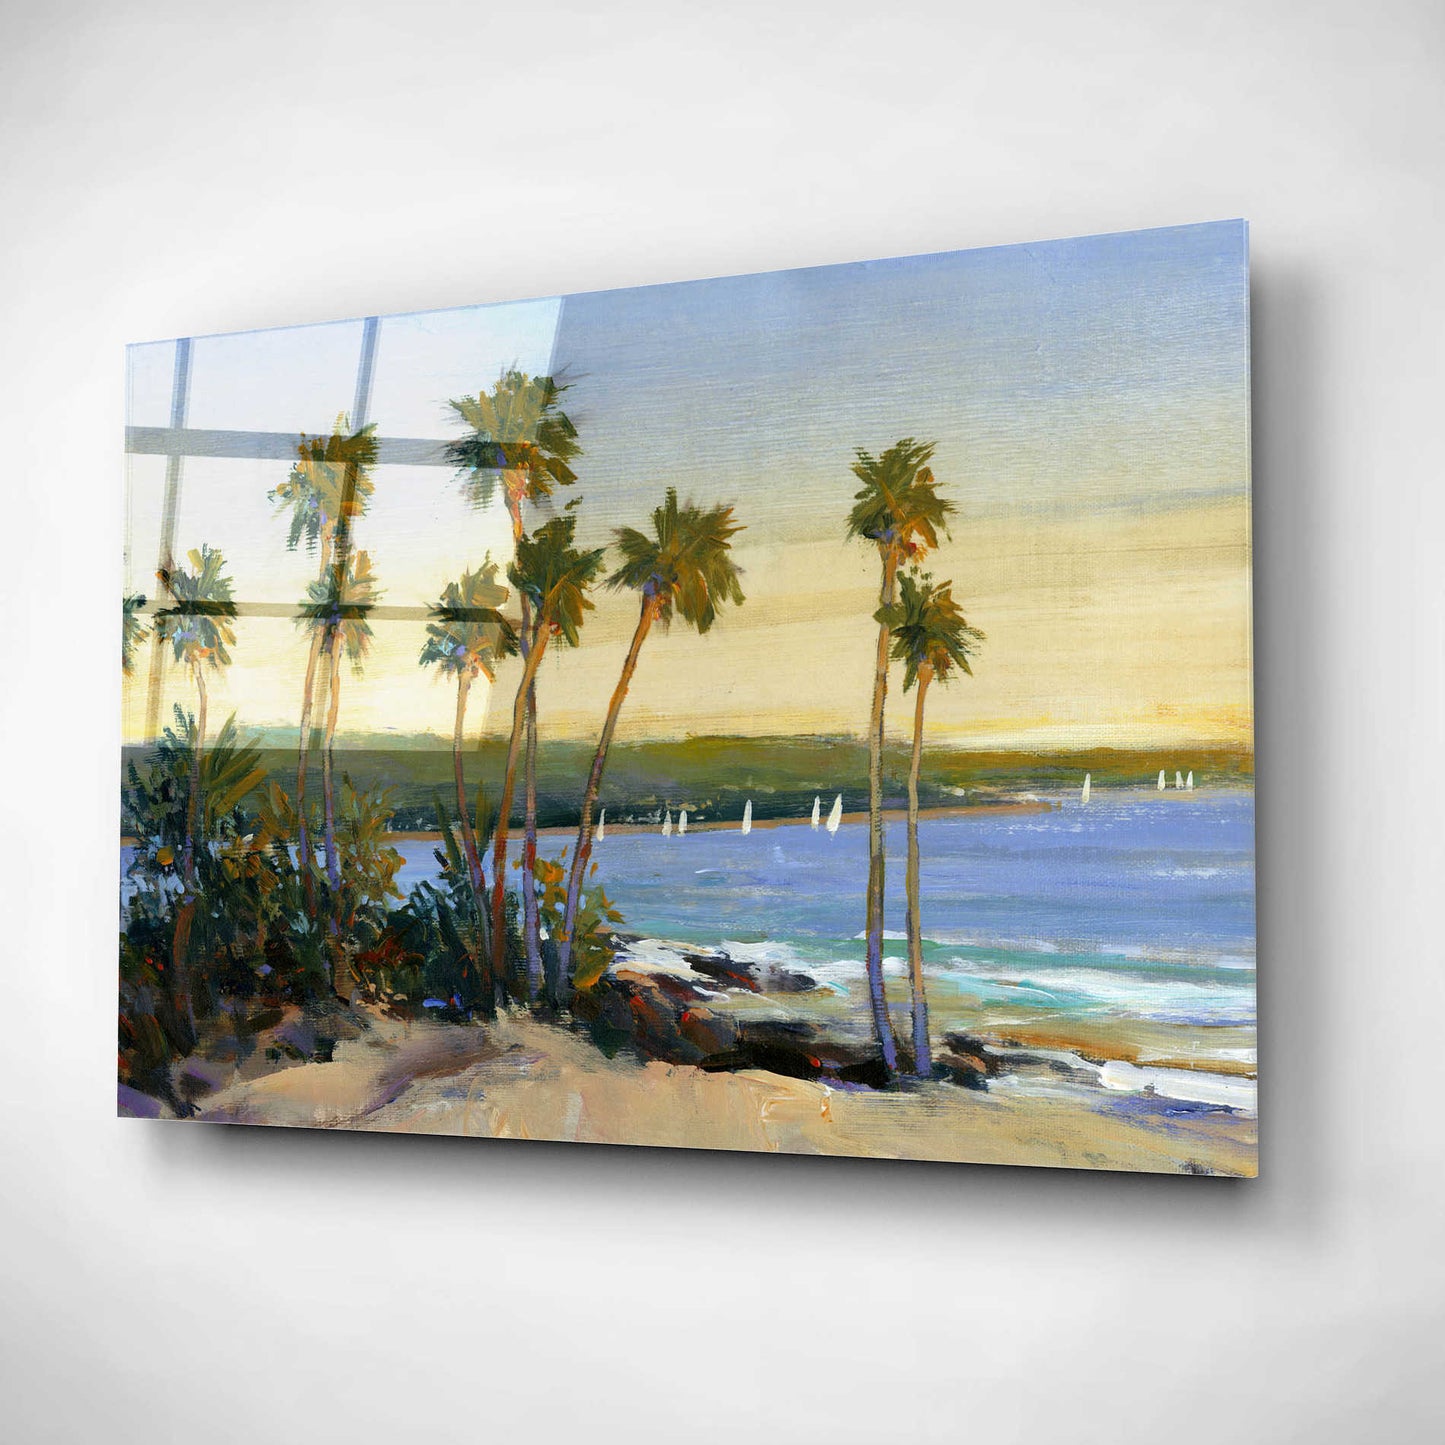 Epic Art 'Distant Shore II' by Tim O'Toole, Acrylic Glass Wall Art,24x16